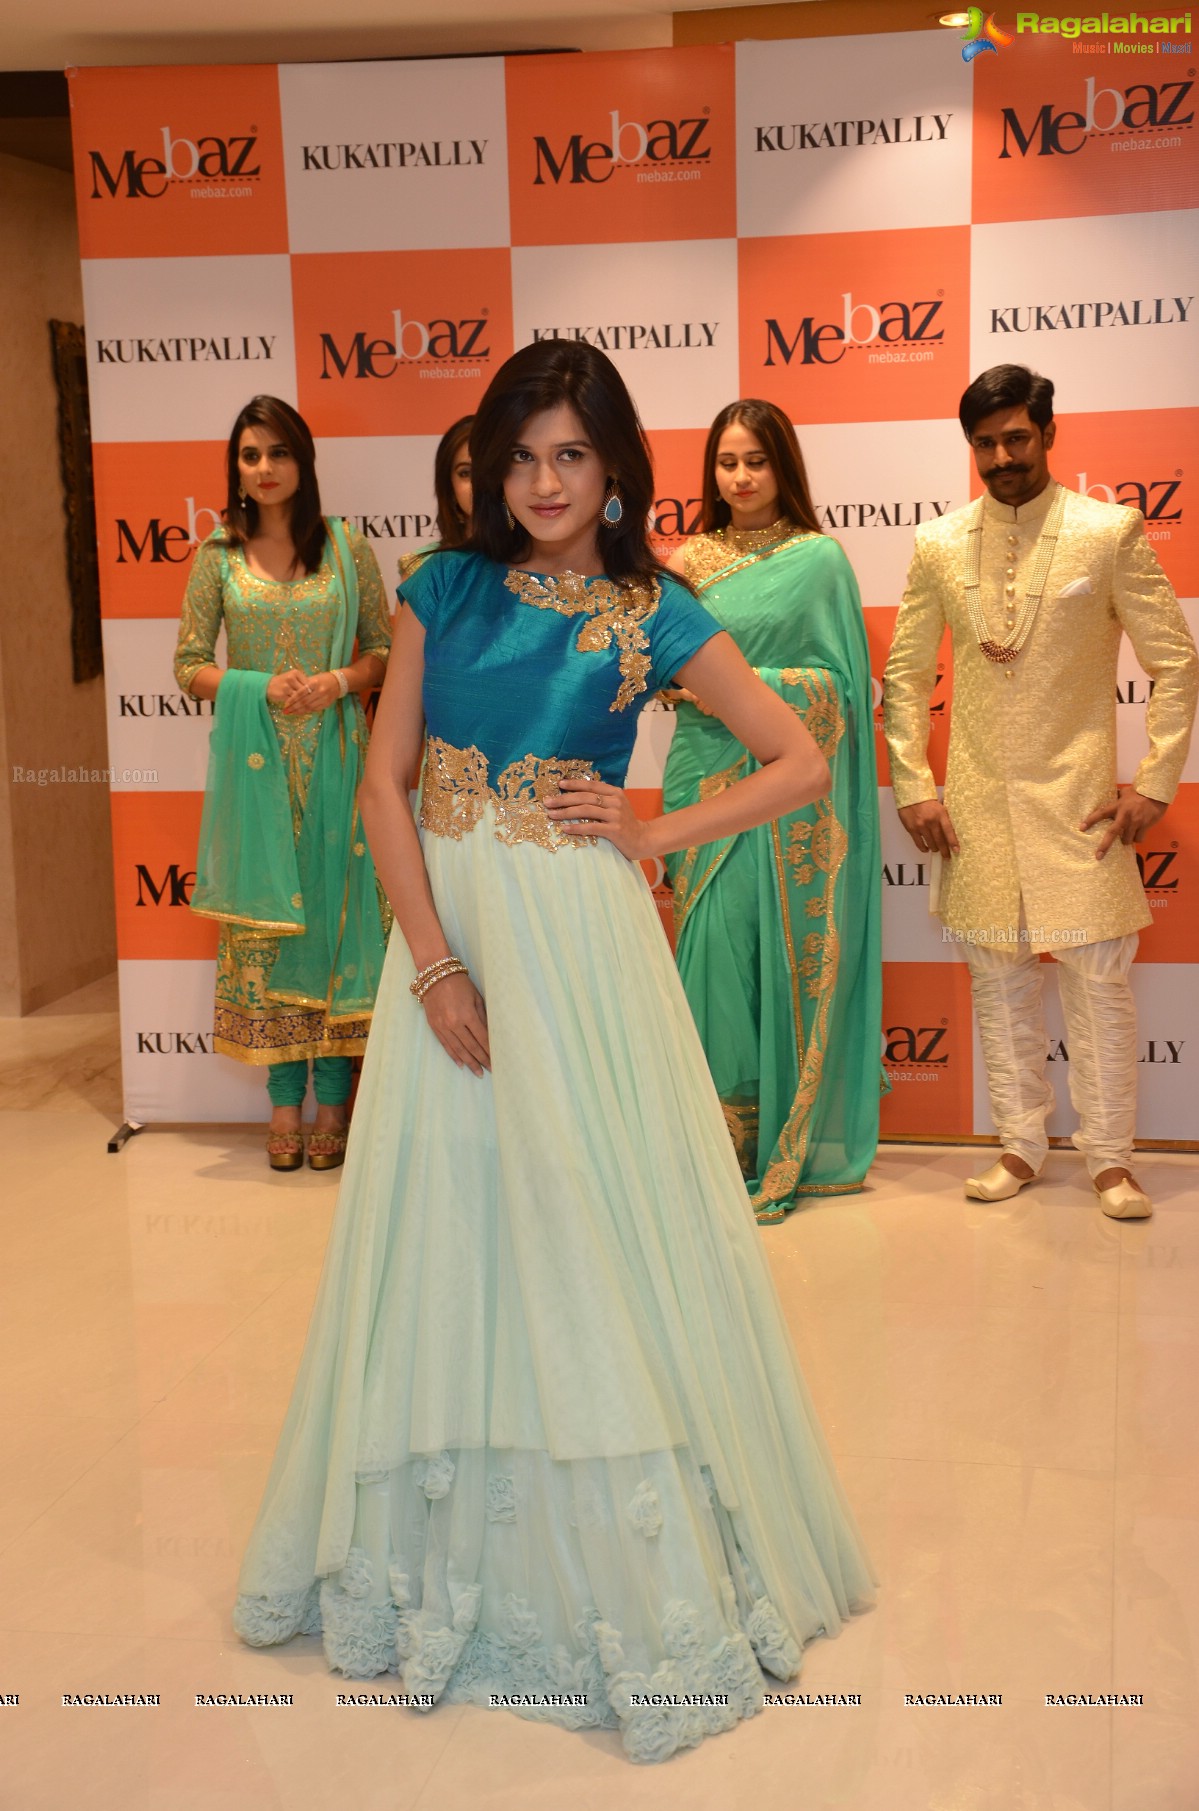 Mebaz Exclusive Summer Collection 2016 Launch at Kukatpally, Hyderabad